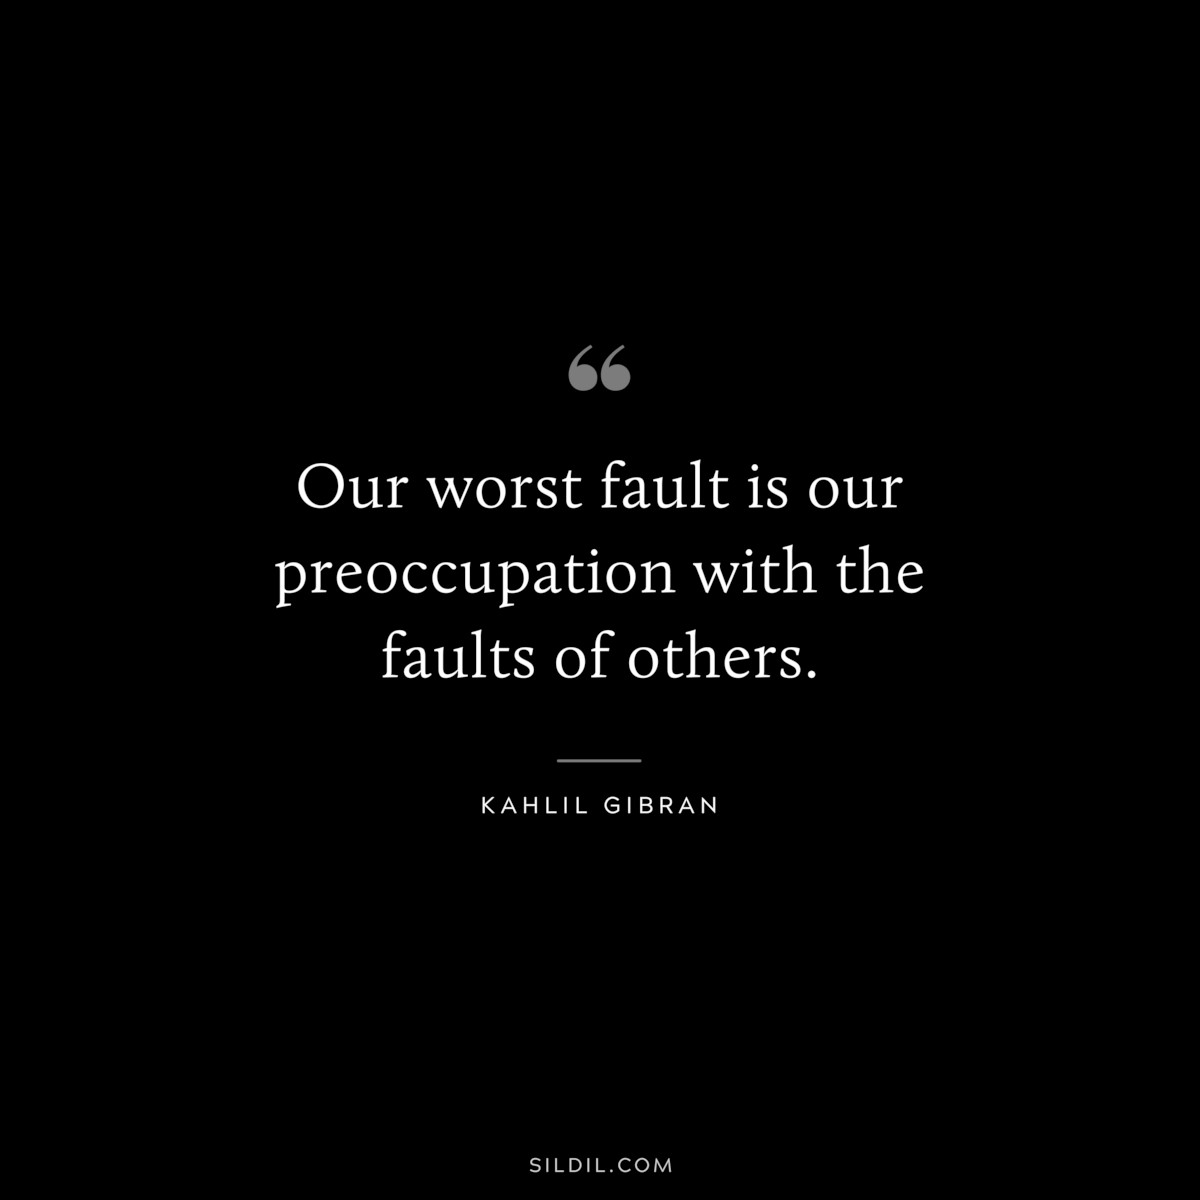 Our worst fault is our preoccupation with the faults of others. ― Kahlil Gibran